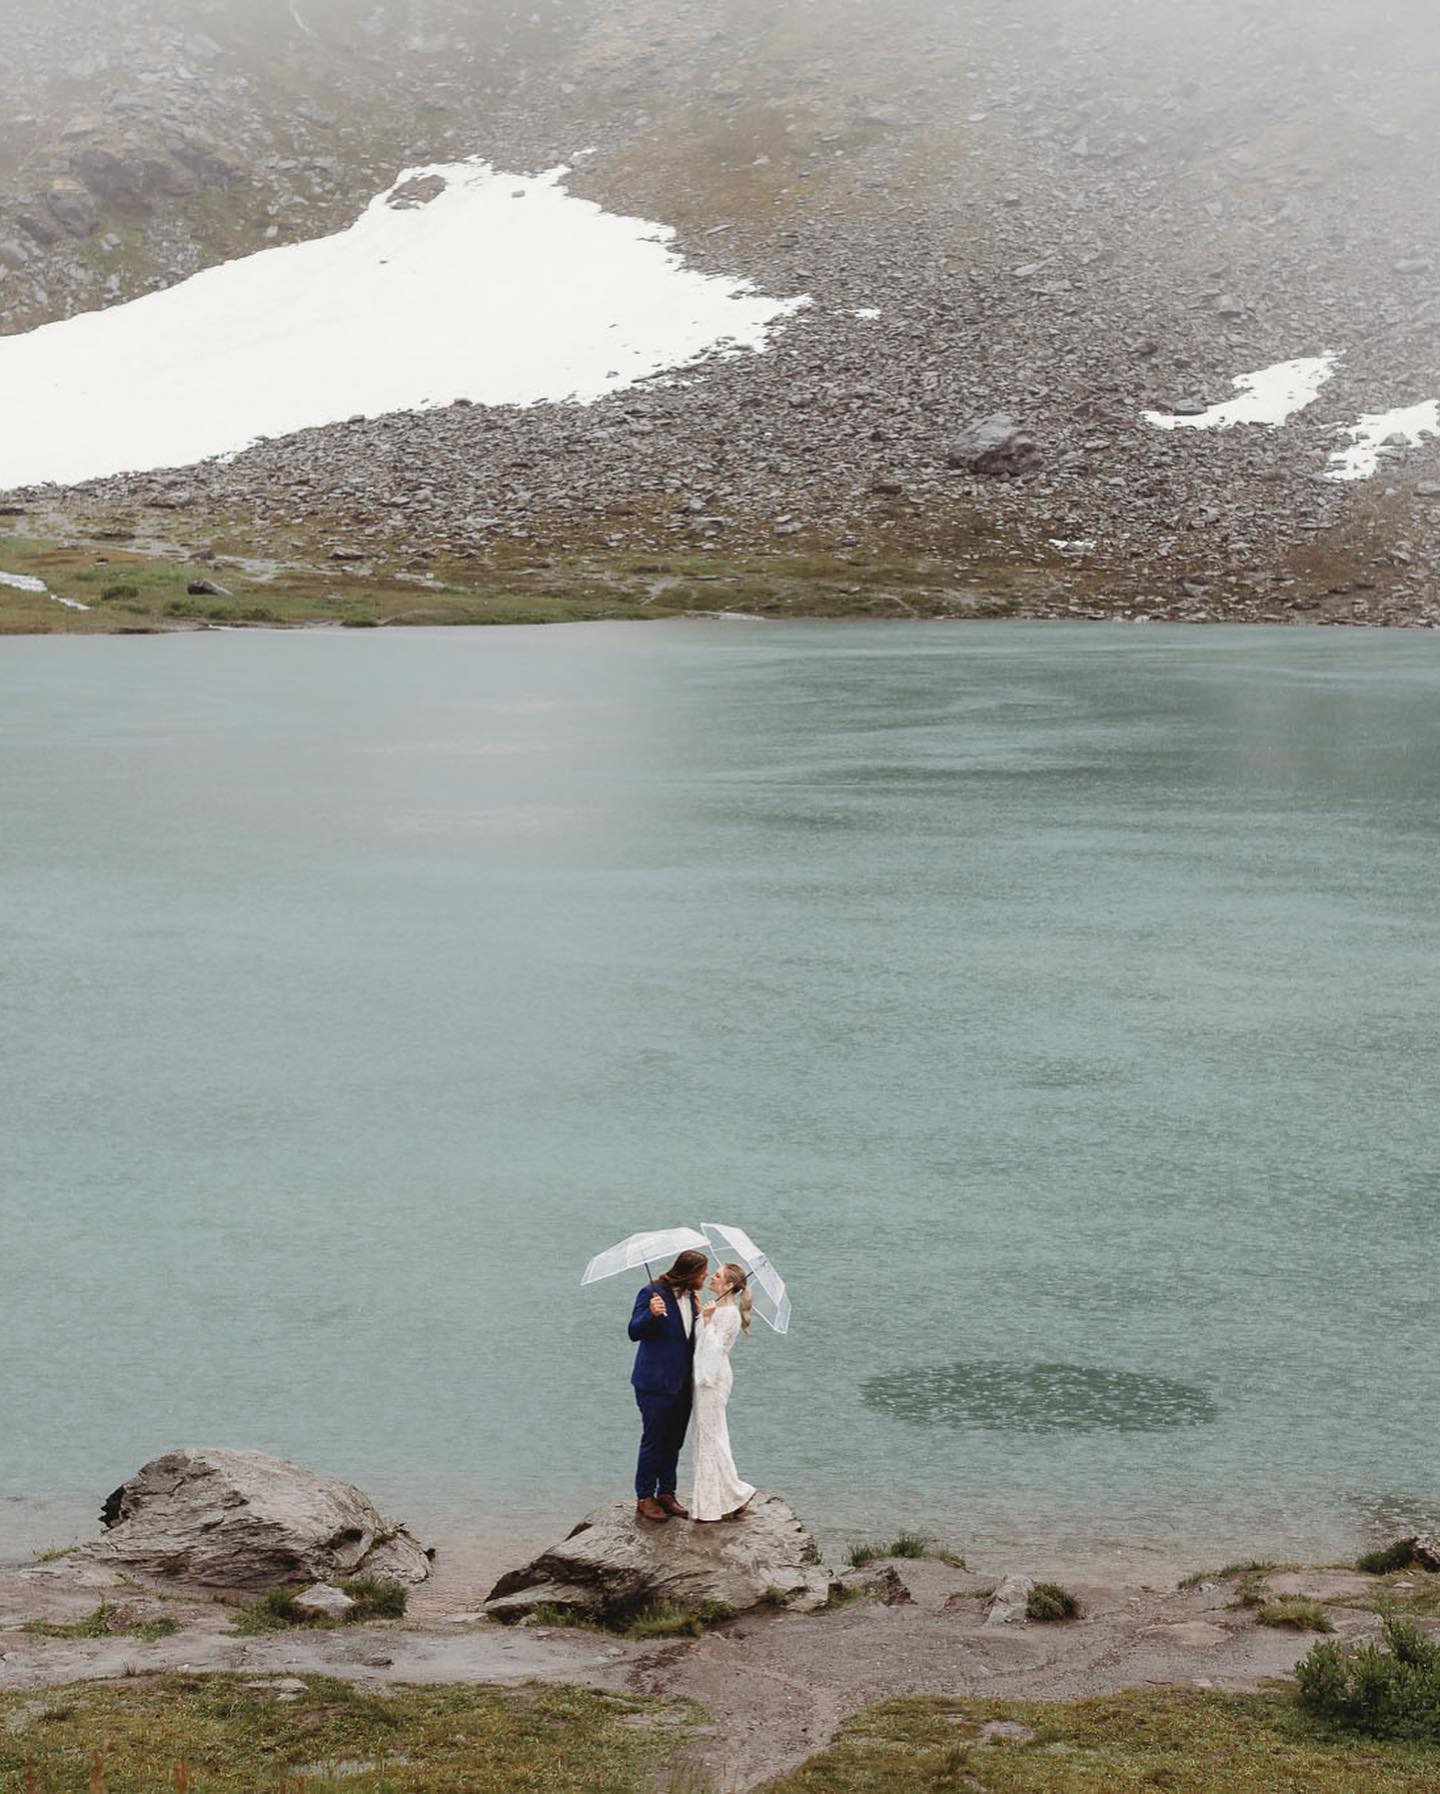 a wedding couple standing holding umbrellas in their wedding attire by a lake in rain